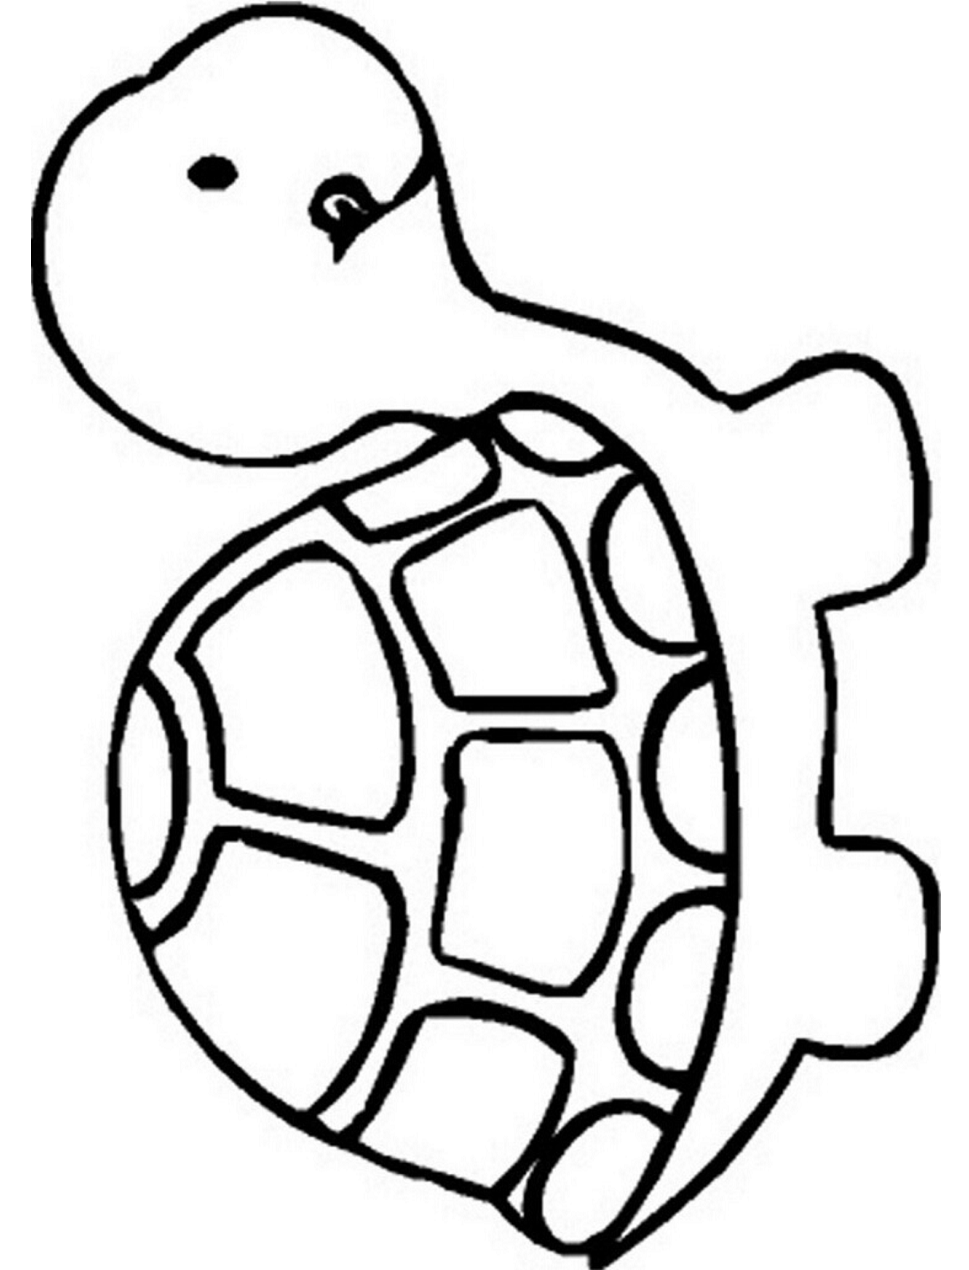 Cartoon Turtle Coloring Pages